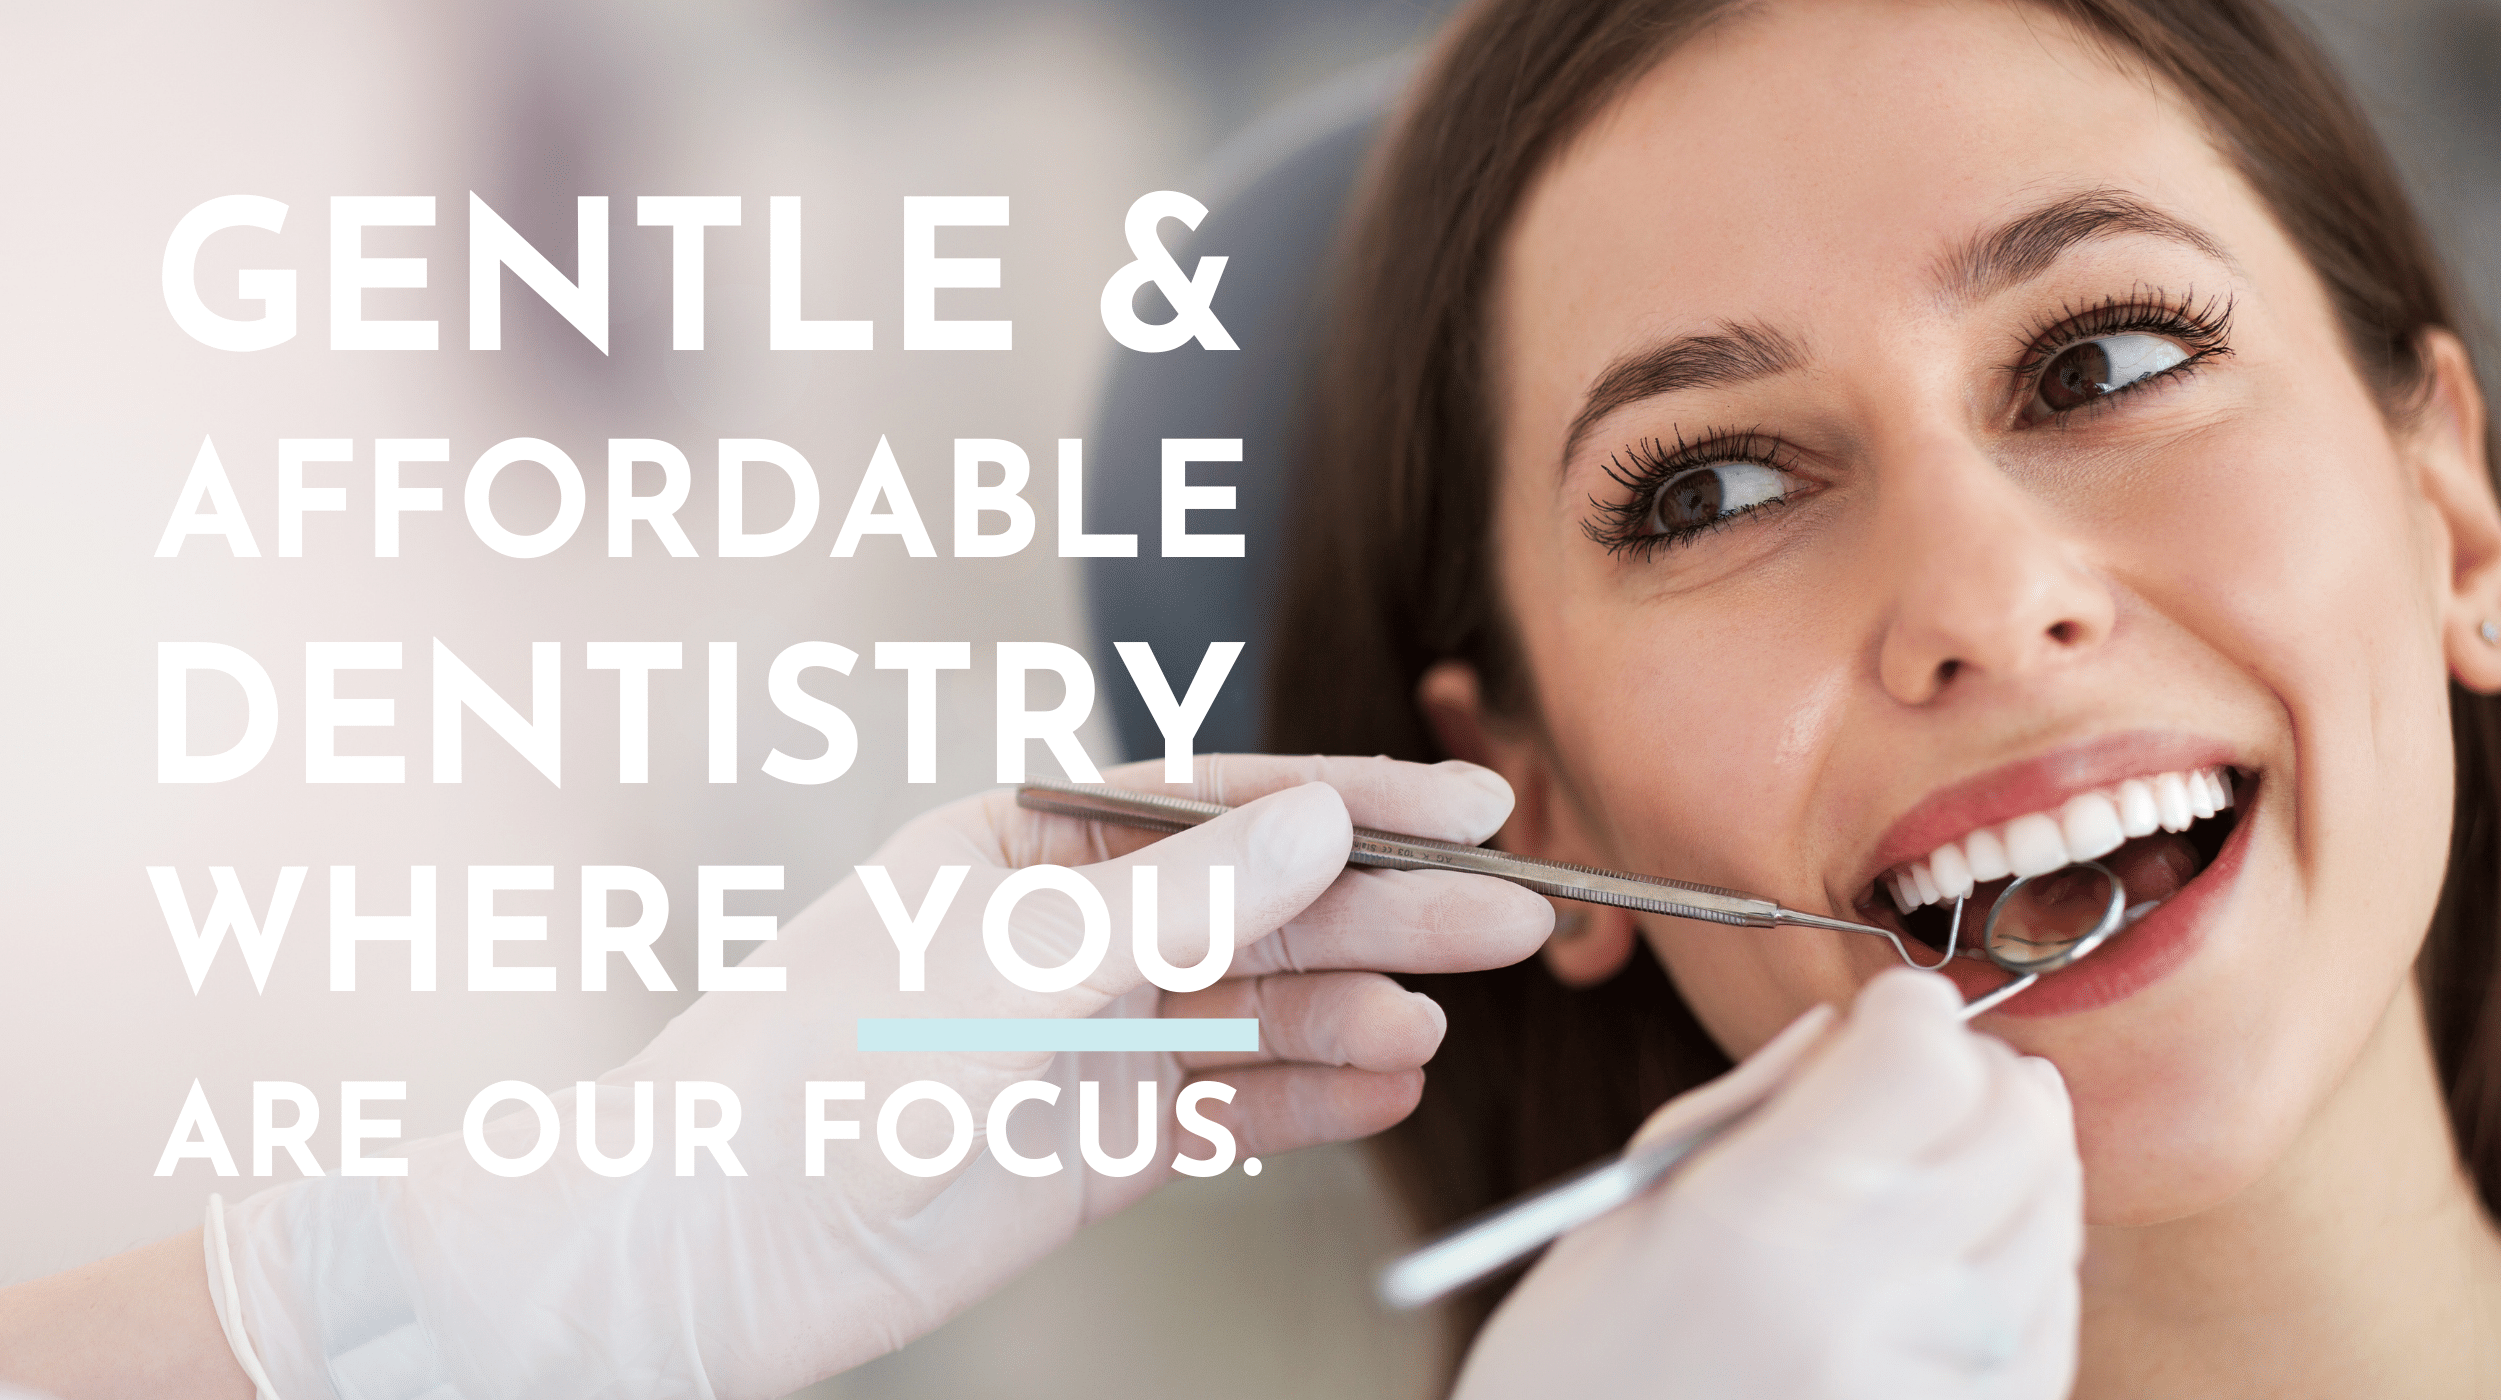 Gentle and affordable dentistry where you are our focus